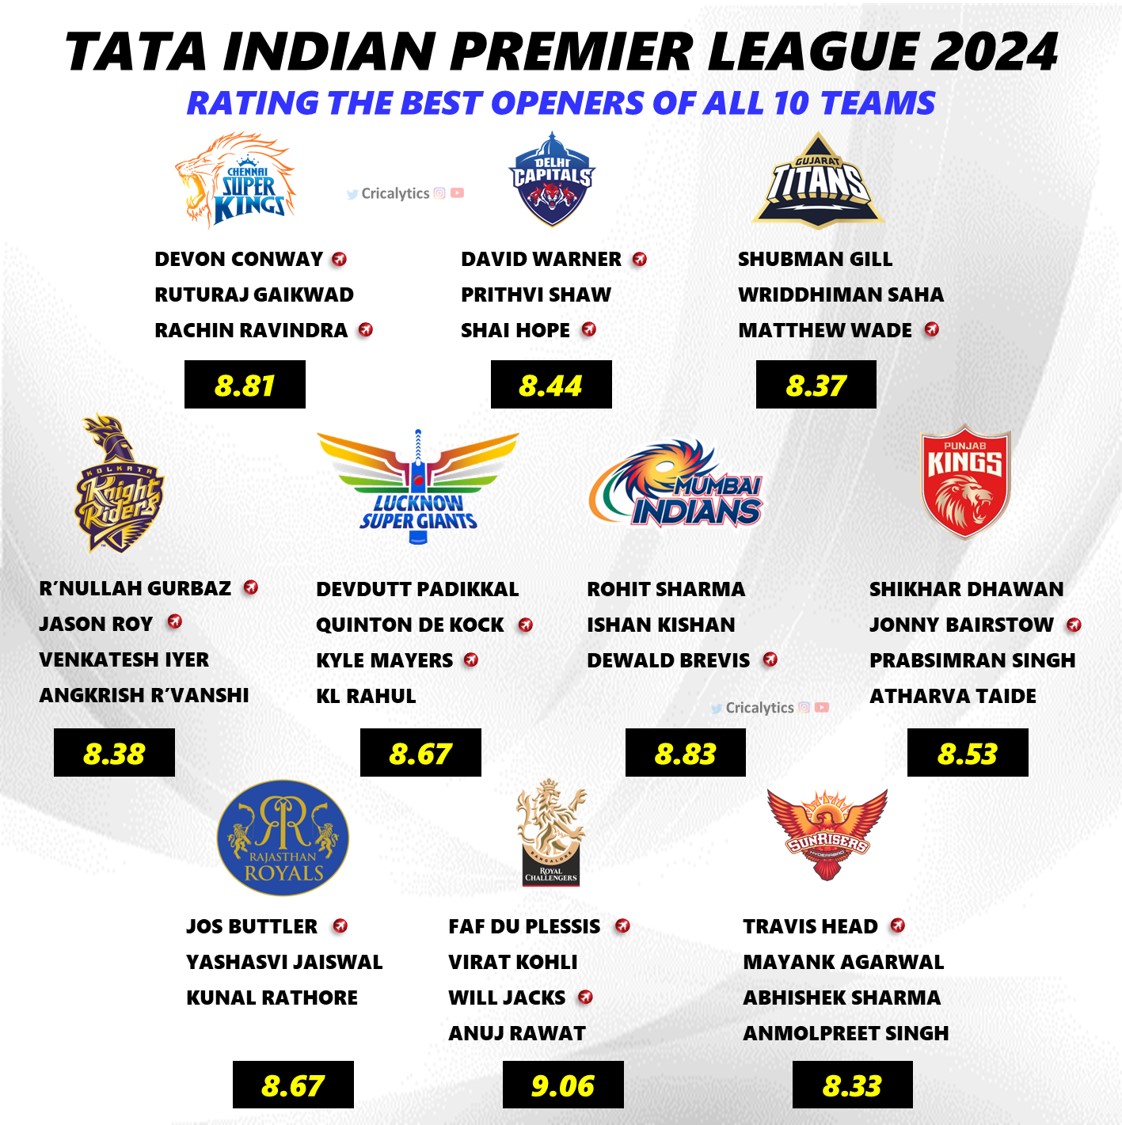 IPL 2024 Rating and Ranking the Best Openers of All 10 Teams